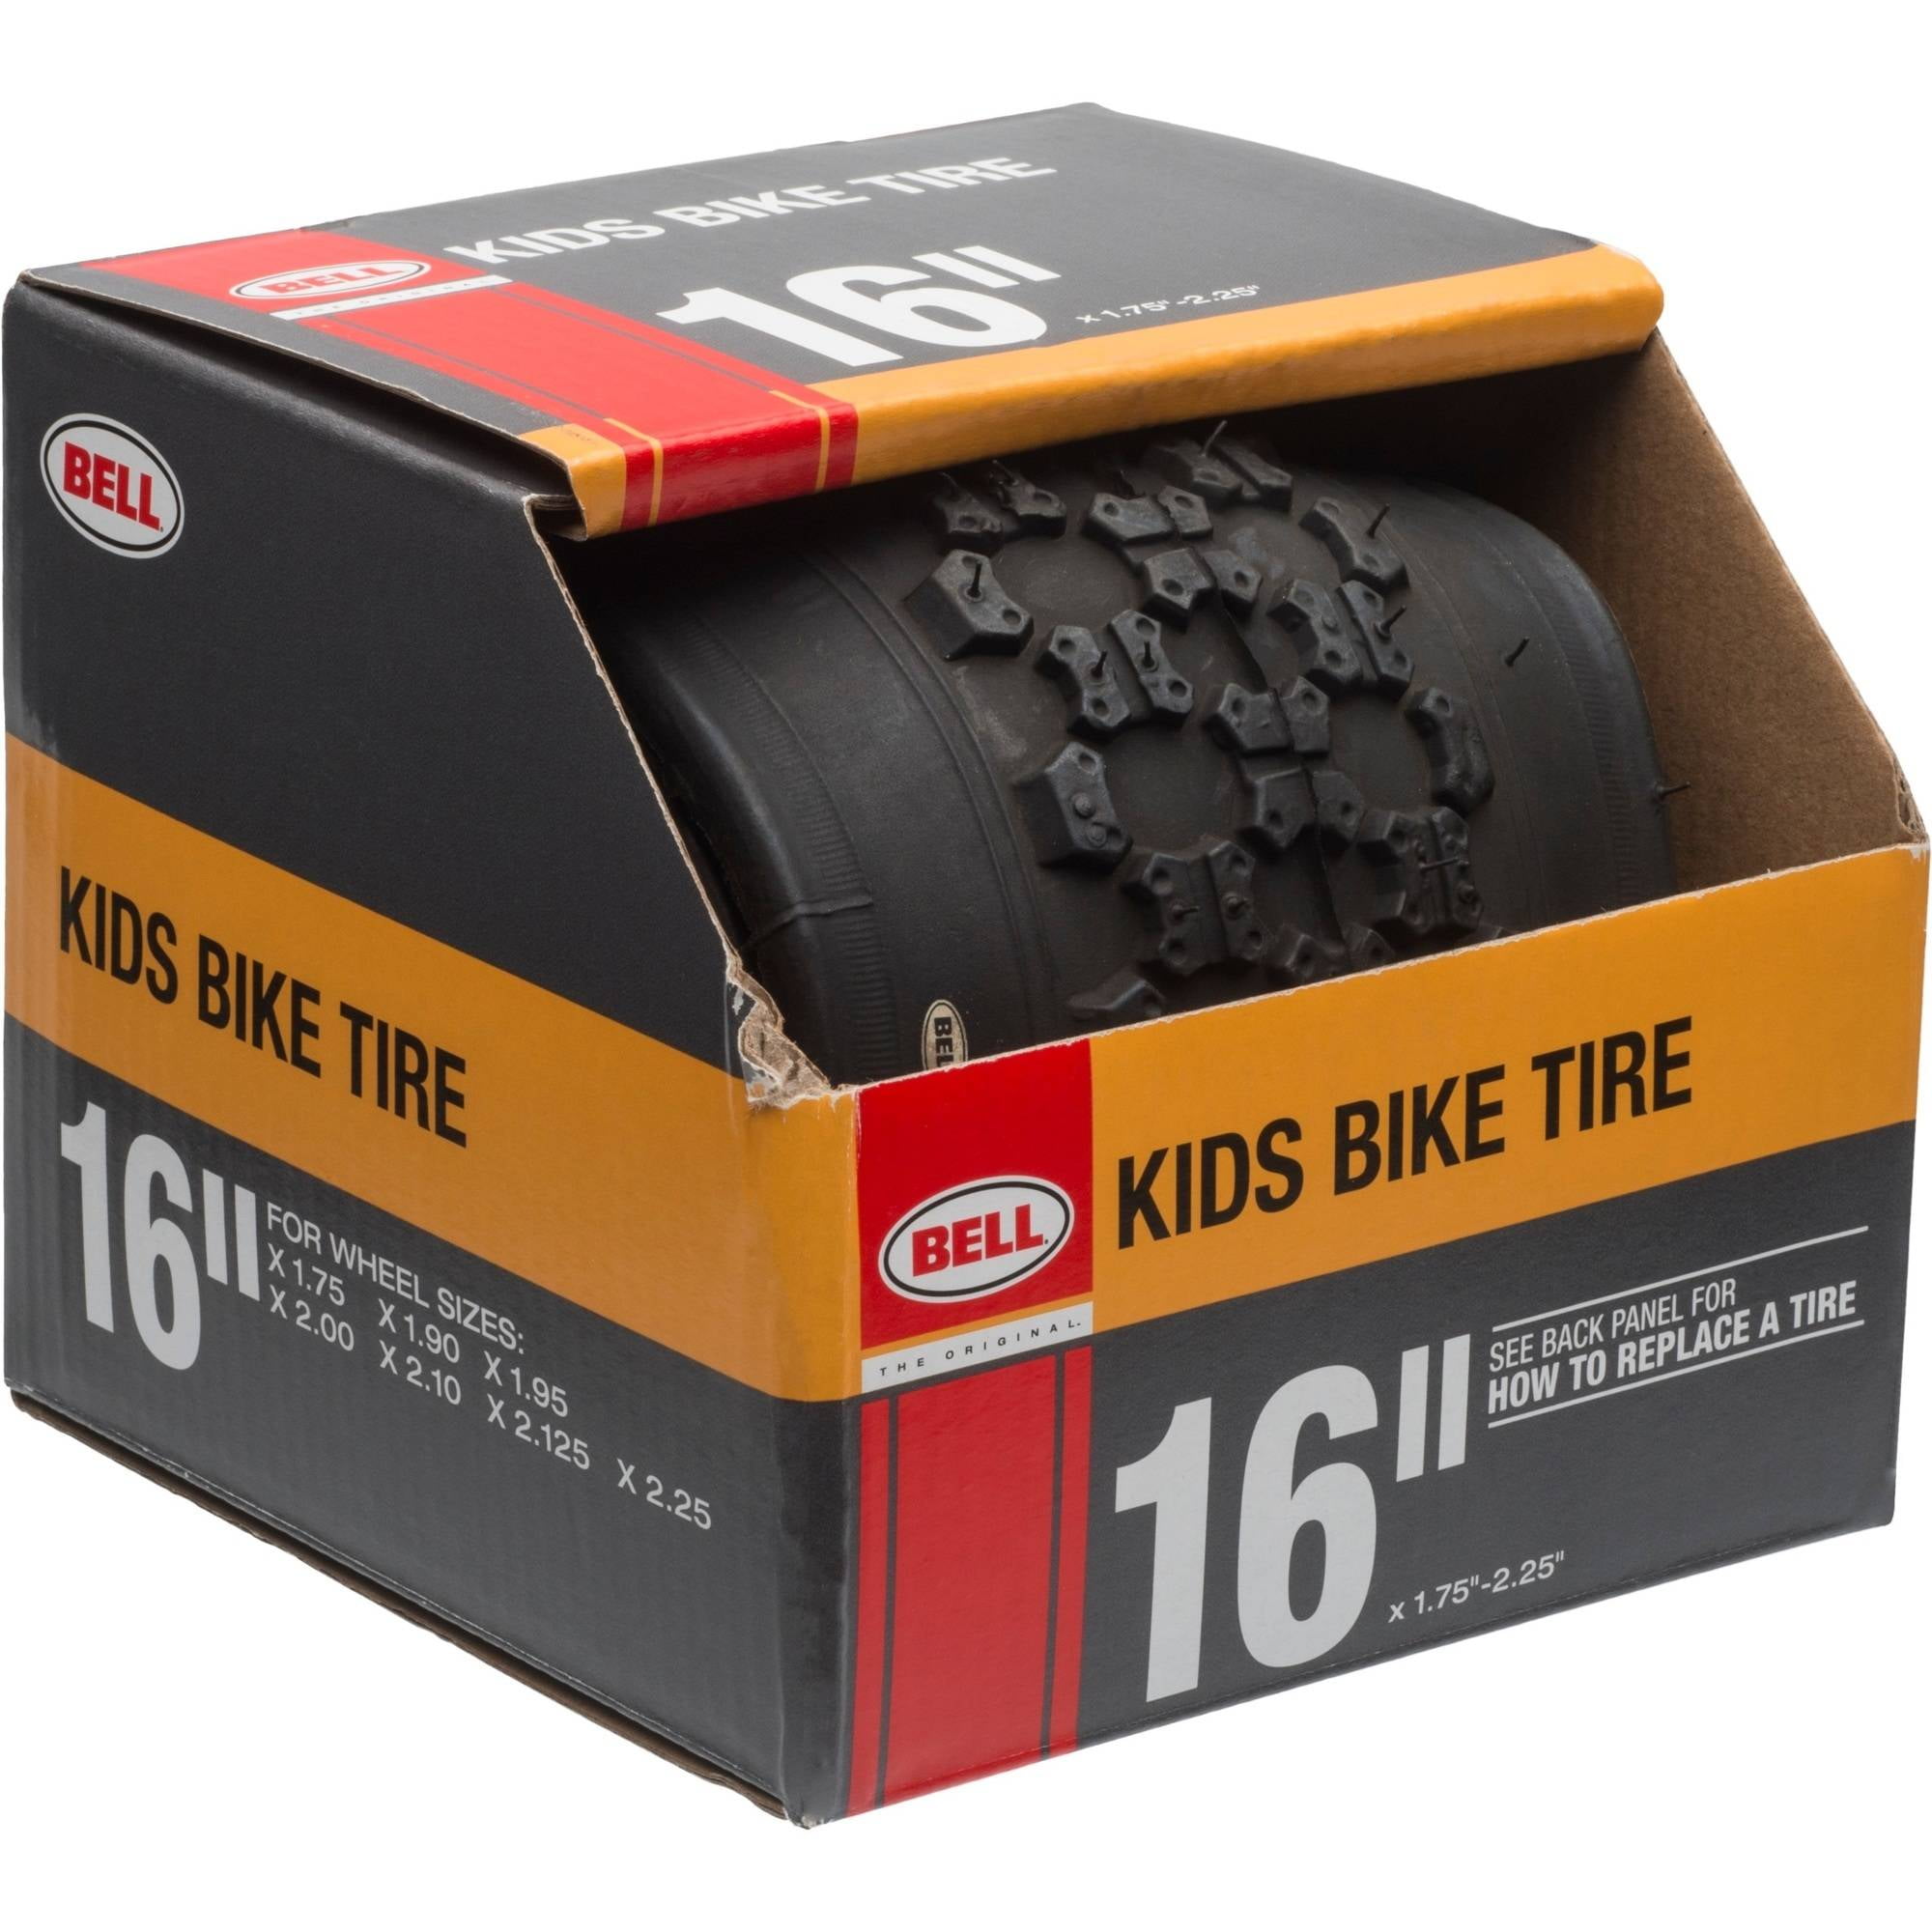 4 Bell 20" Bike Inner Tube 20 X 1.75-2.25 Bicycle Rubber Tire Interior BMX for sale online 